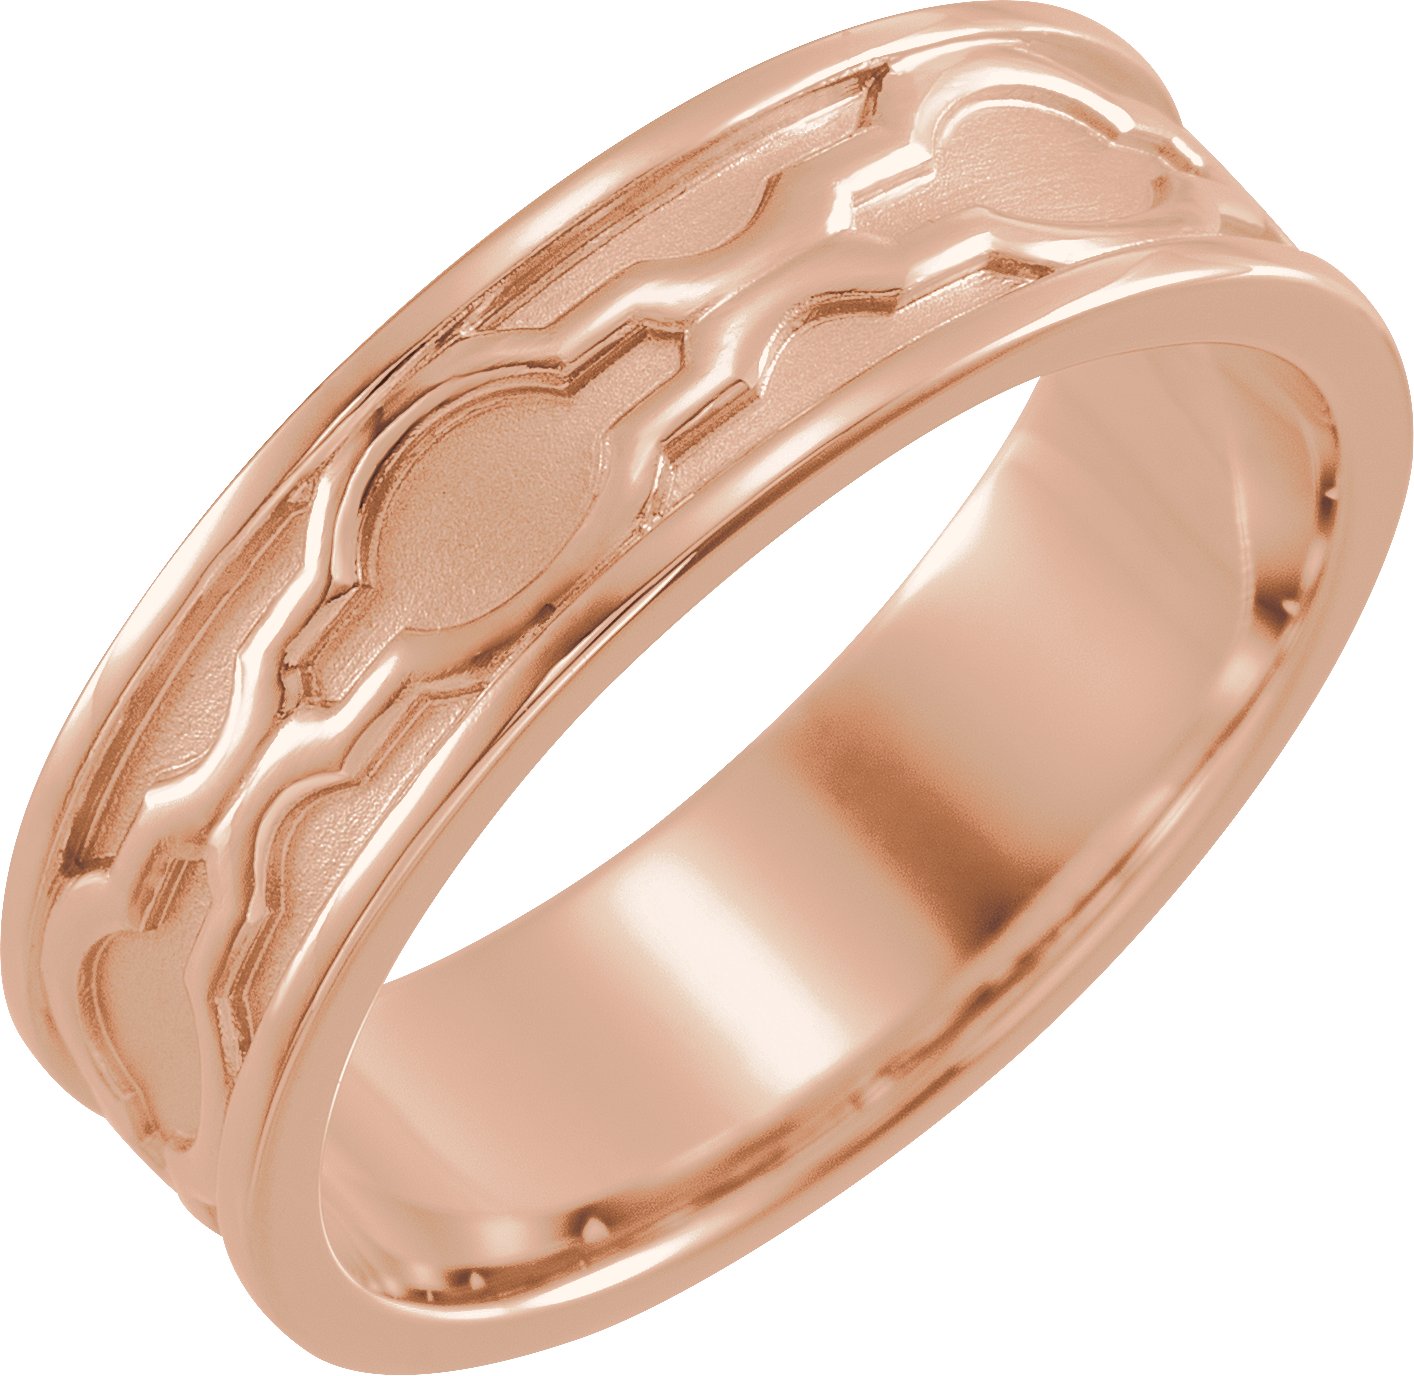 14K Rose 6 mm Patterned Band with Bead Blast Finish Size 11.5 Ref 16324105